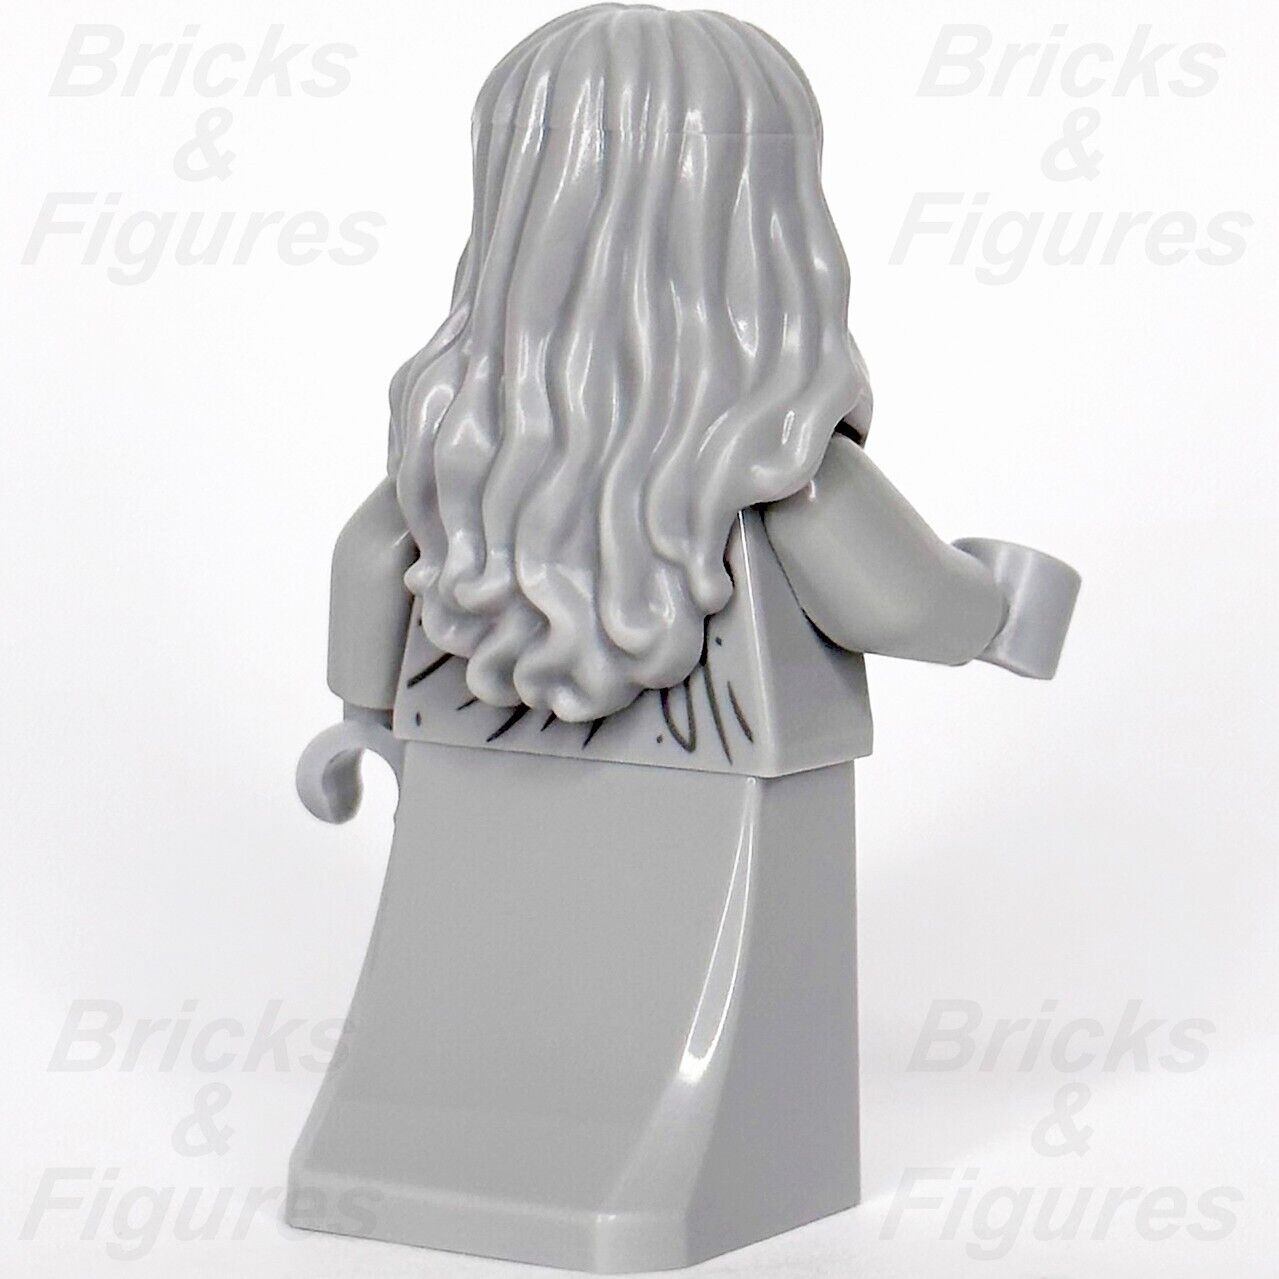 LEGO Elf Statue Minifigure The Hobbit & The Lord of the Rings 10316 lor130 LOTR